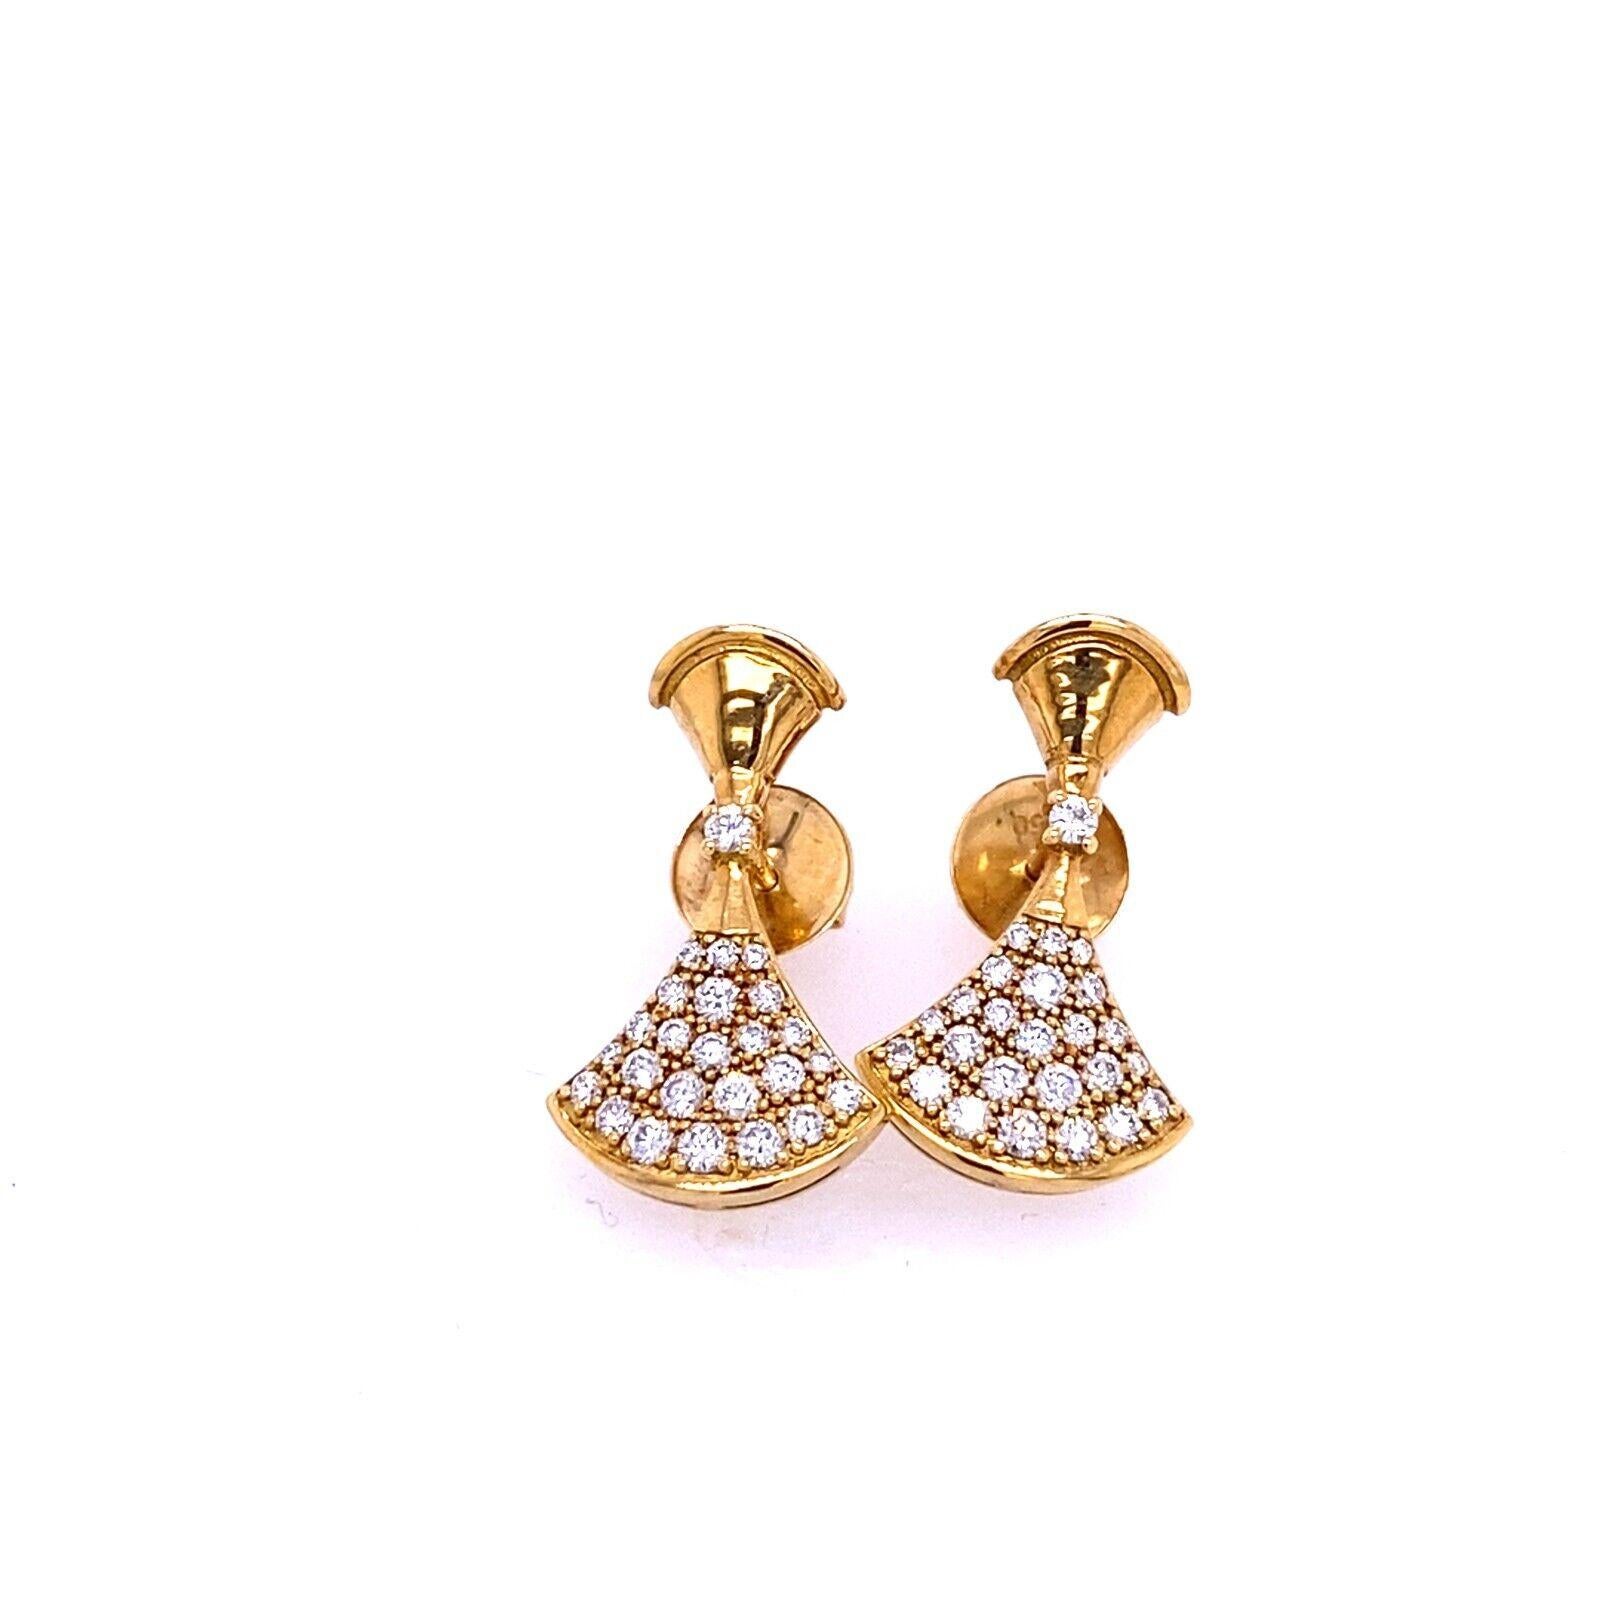 18ct Yellow Gold Fine Quality Fan Shape Diamond Earrings

A pair of magnificent fine quality fan shape diamond earrings set in 18ct yellow gold with alpha fittings. The diamonds have a total carat weight of 1.0ct round brilliant cut.

Additional